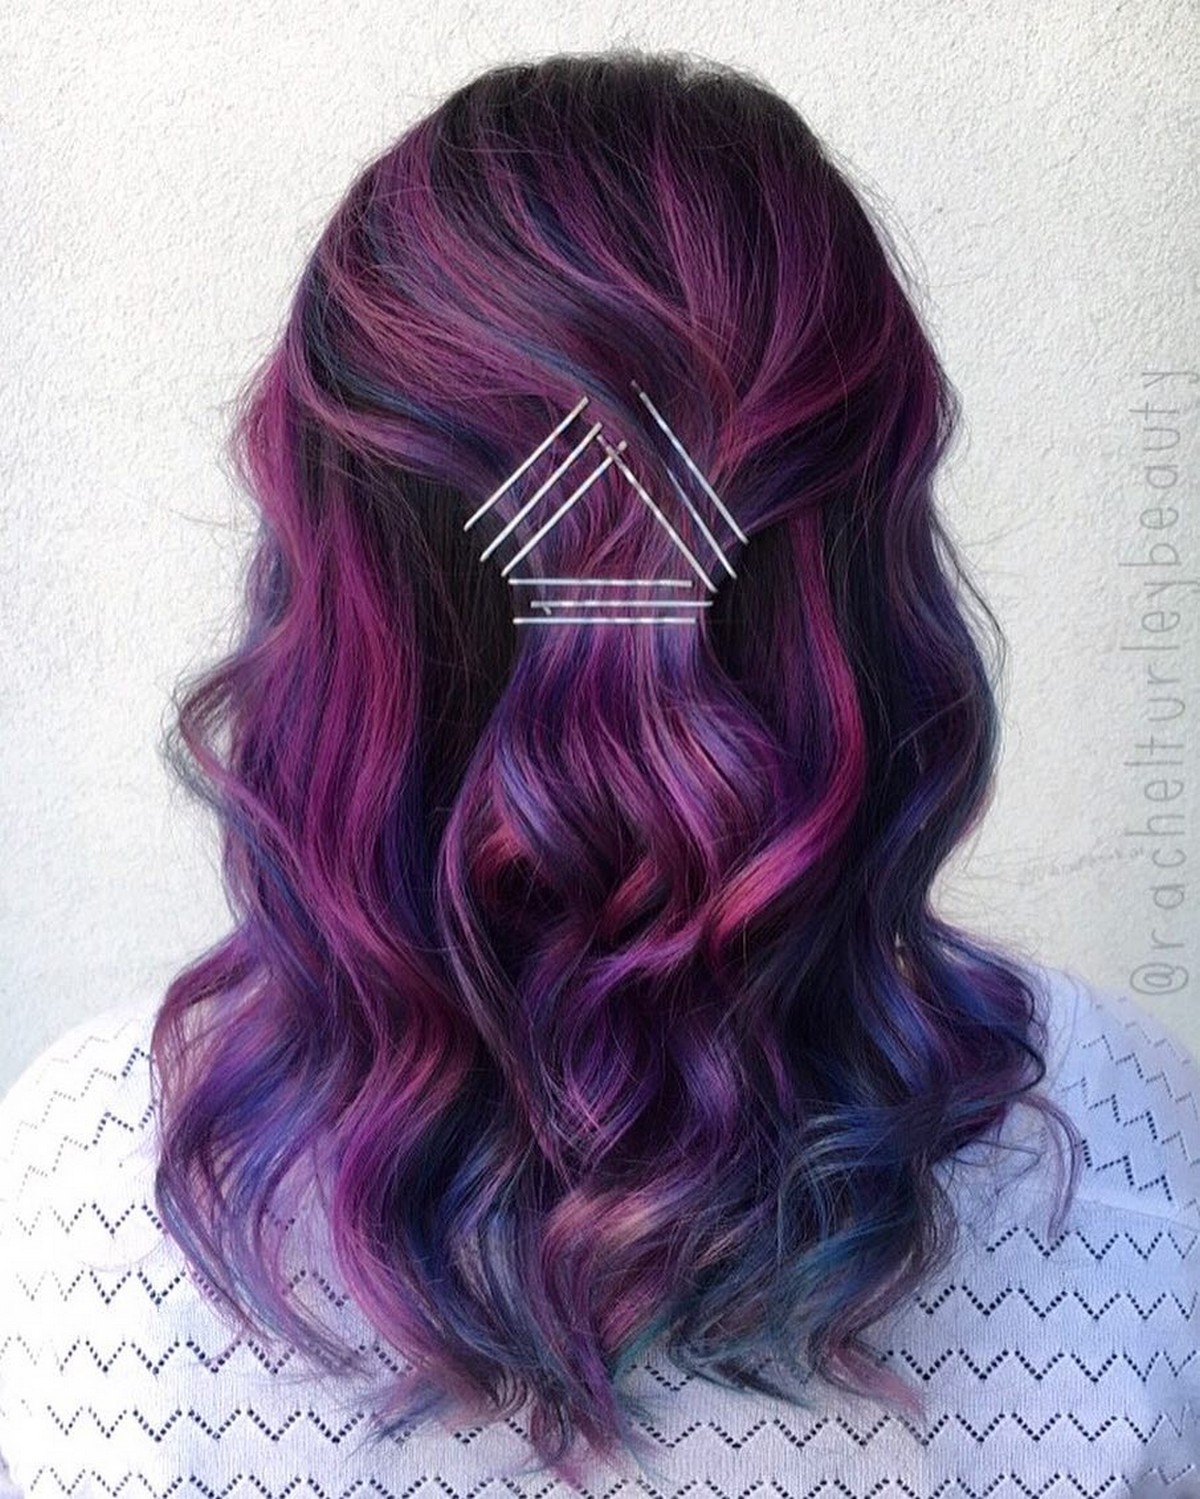 Pin on Hair color